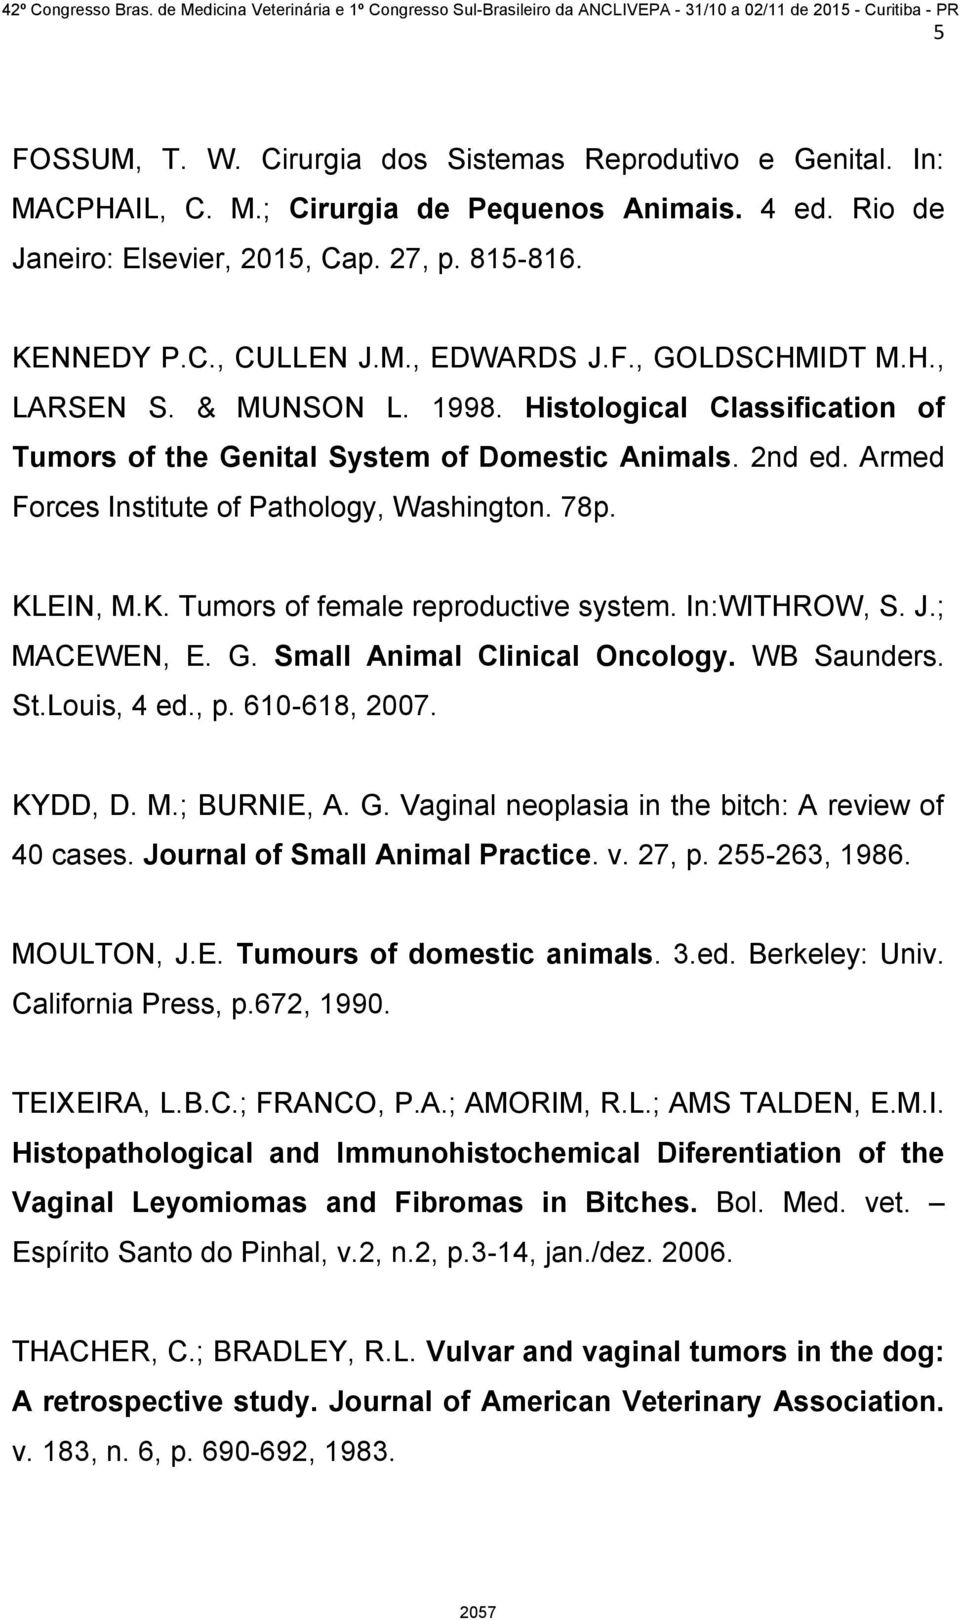 KLEIN, M.K. Tumors of female reproductive system. In:WITHROW, S. J.; MACEWEN, E. G. Small Animal Clinical Oncology. WB Saunders. St.Louis, 4 ed., p. 610-618, 2007. KYDD, D. M.; BURNIE, A. G. Vaginal neoplasia in the bitch: A review of 40 cases.